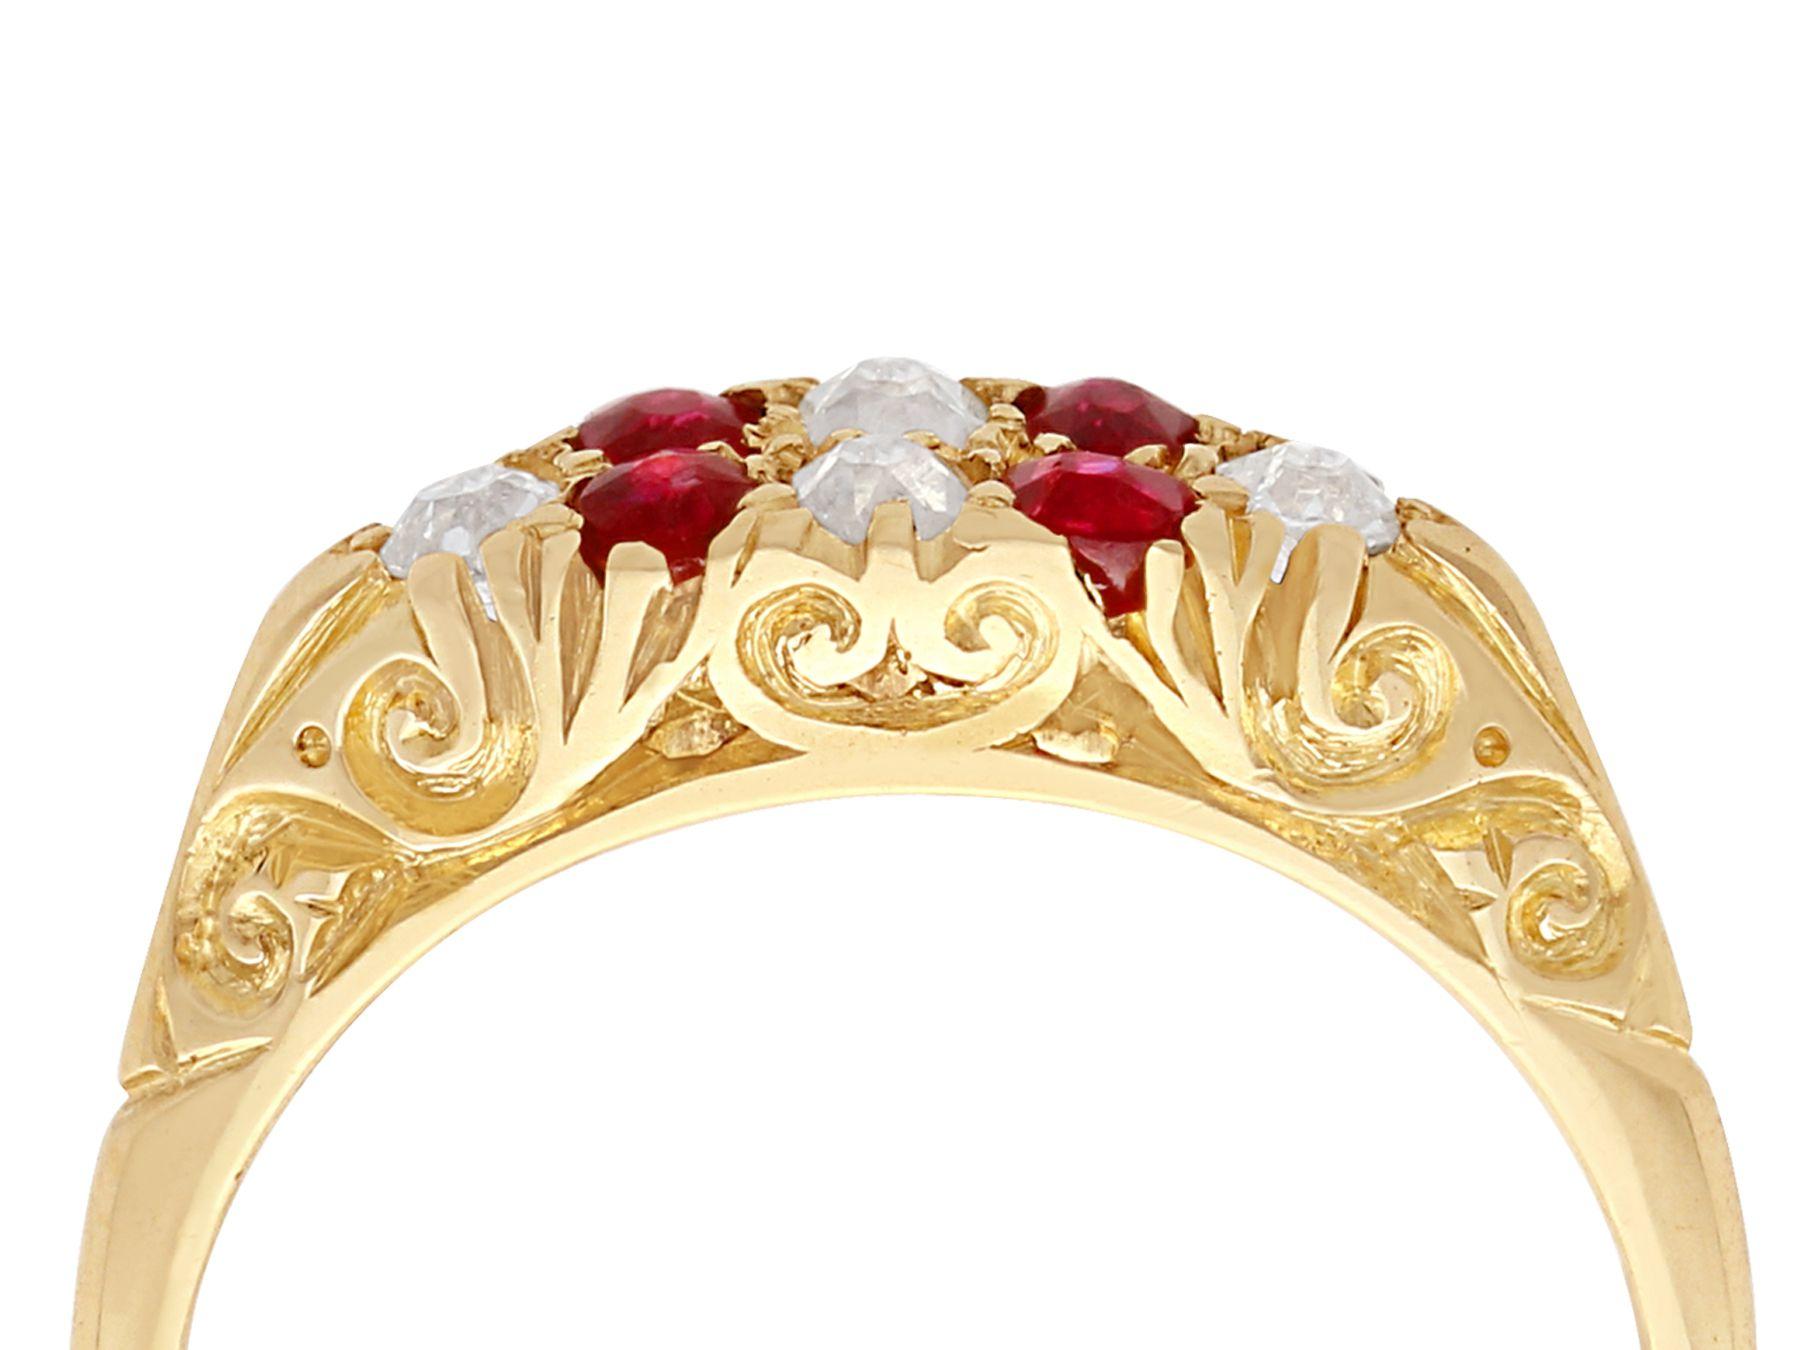 A fine and impressive antique 0.16 carat natural ruby and 0.15 carat diamond, 18 karat yellow gold cocktail ring; part of our antique jewelry and estate jewelry collections.

This fine and impressive antique ruby ring has been crafted in 18k yellow